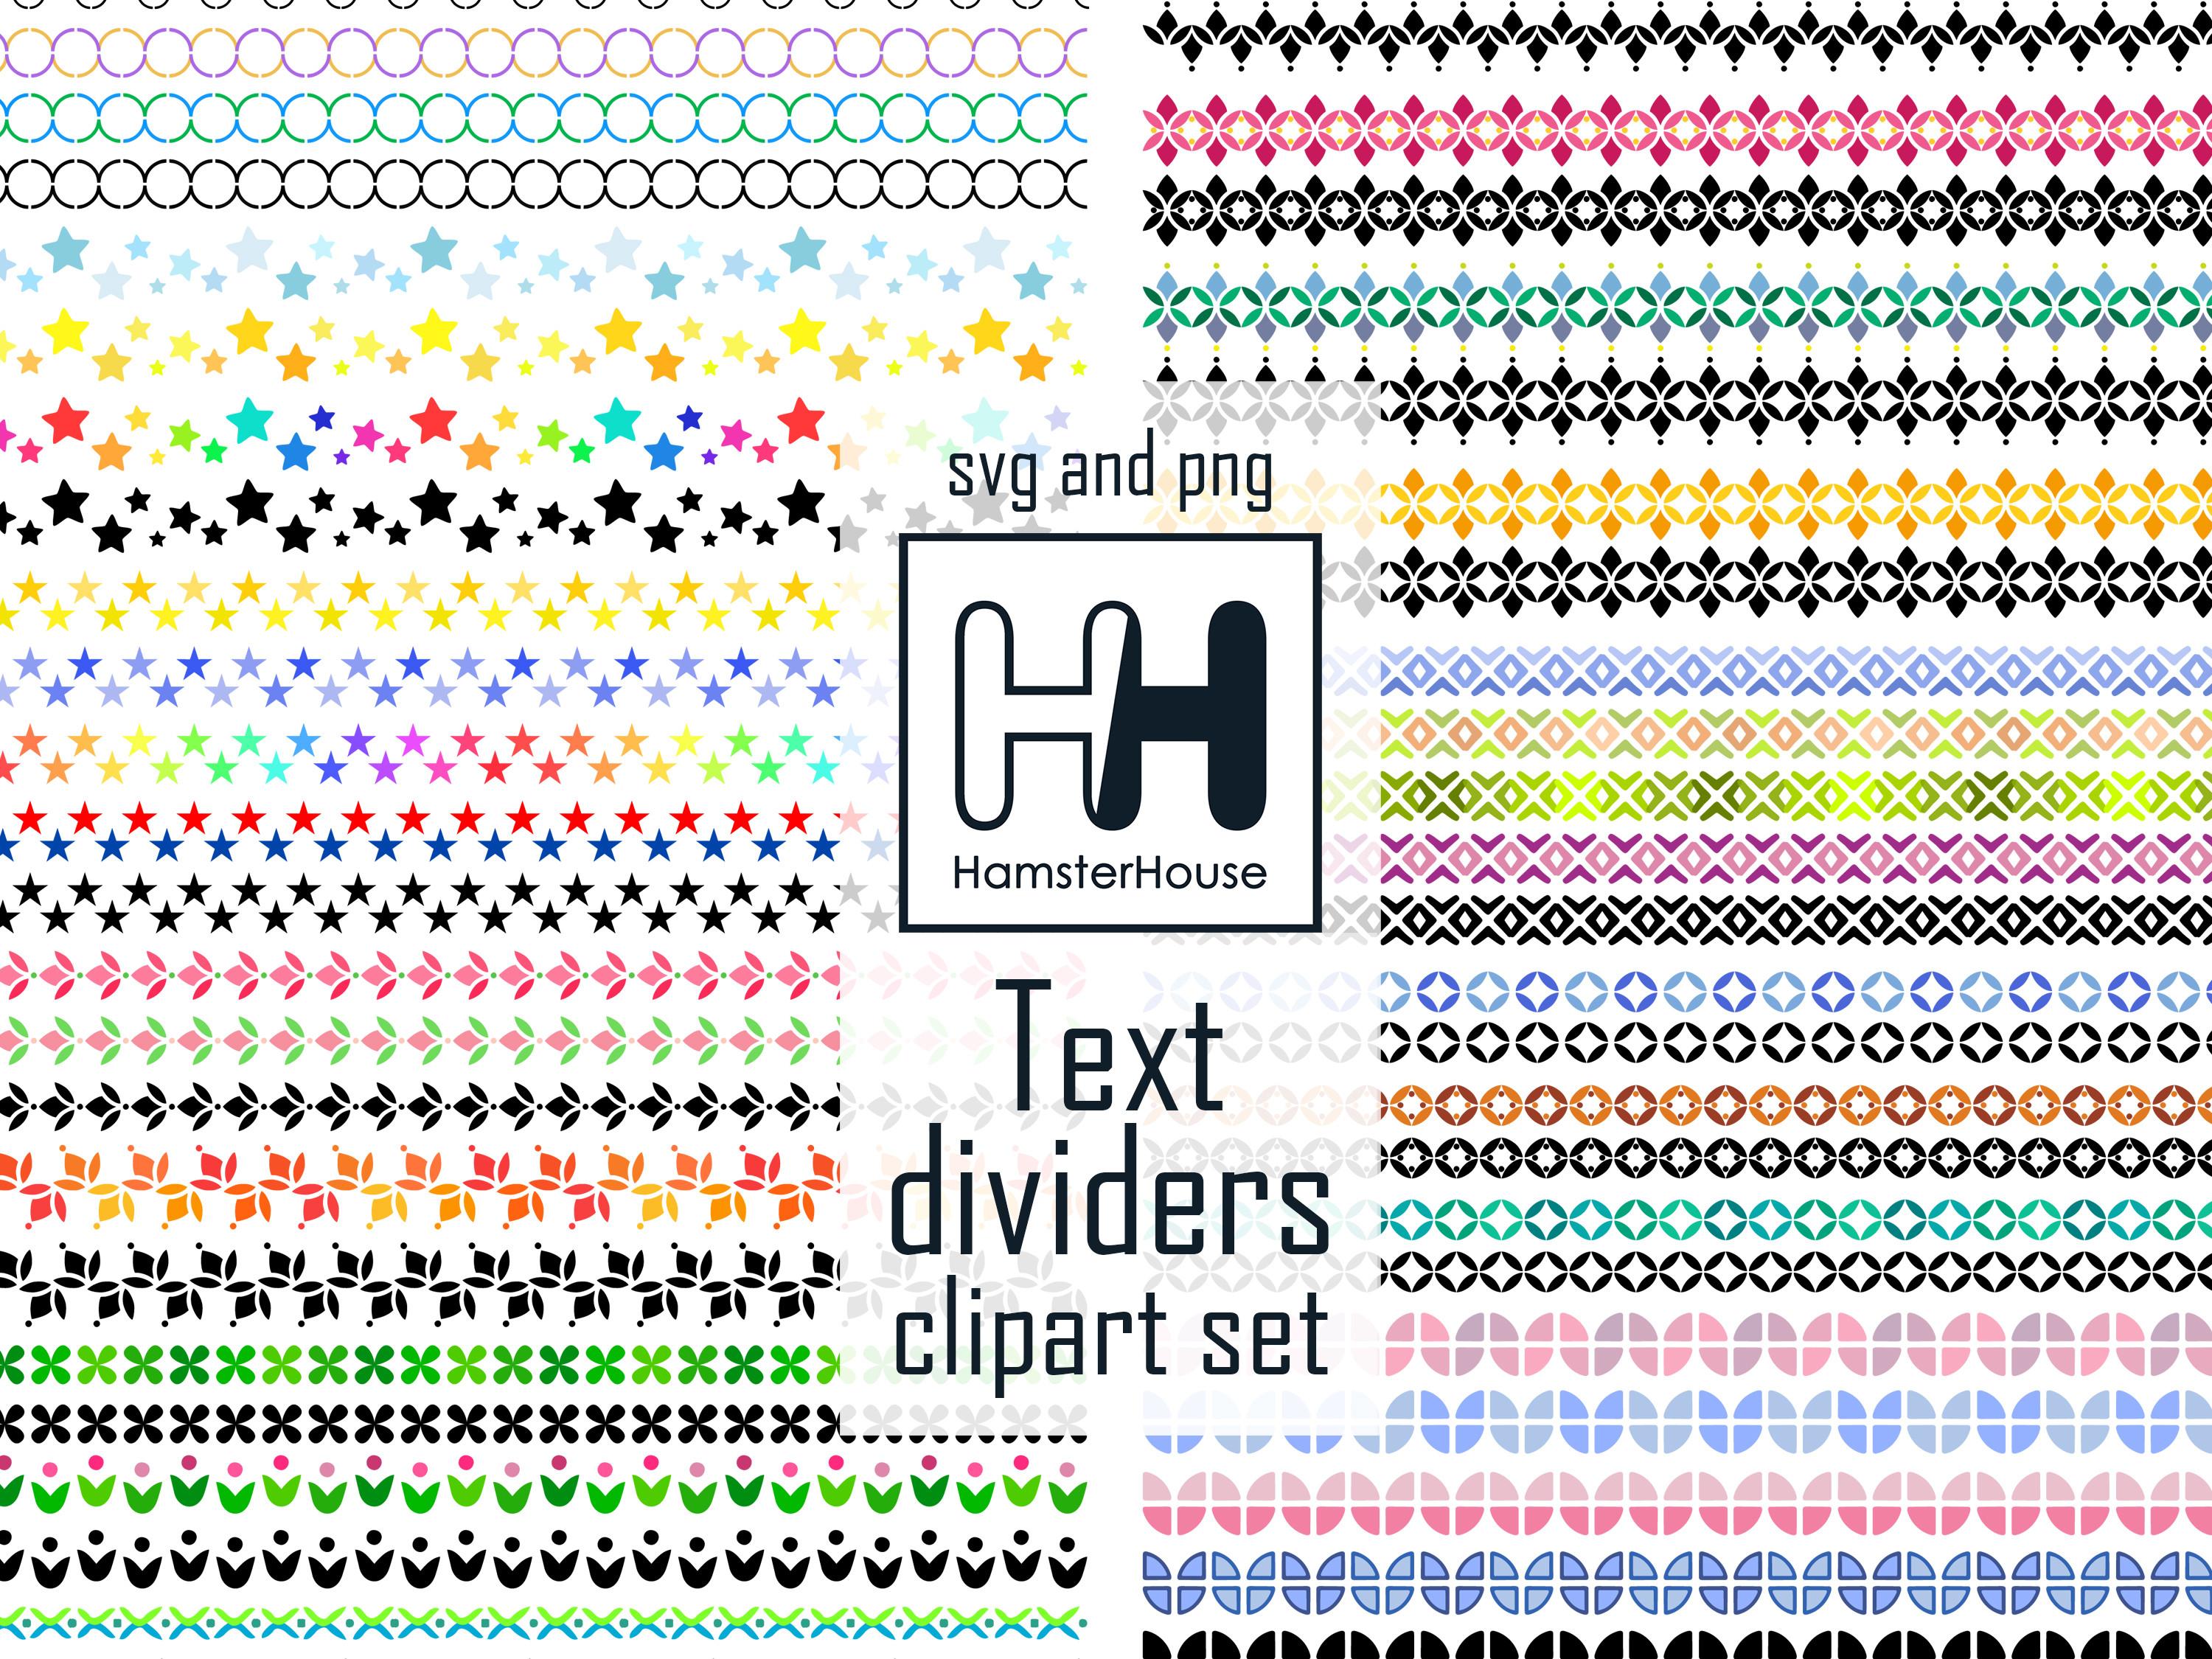 Text Dividers Clipart Set, Svg and Png